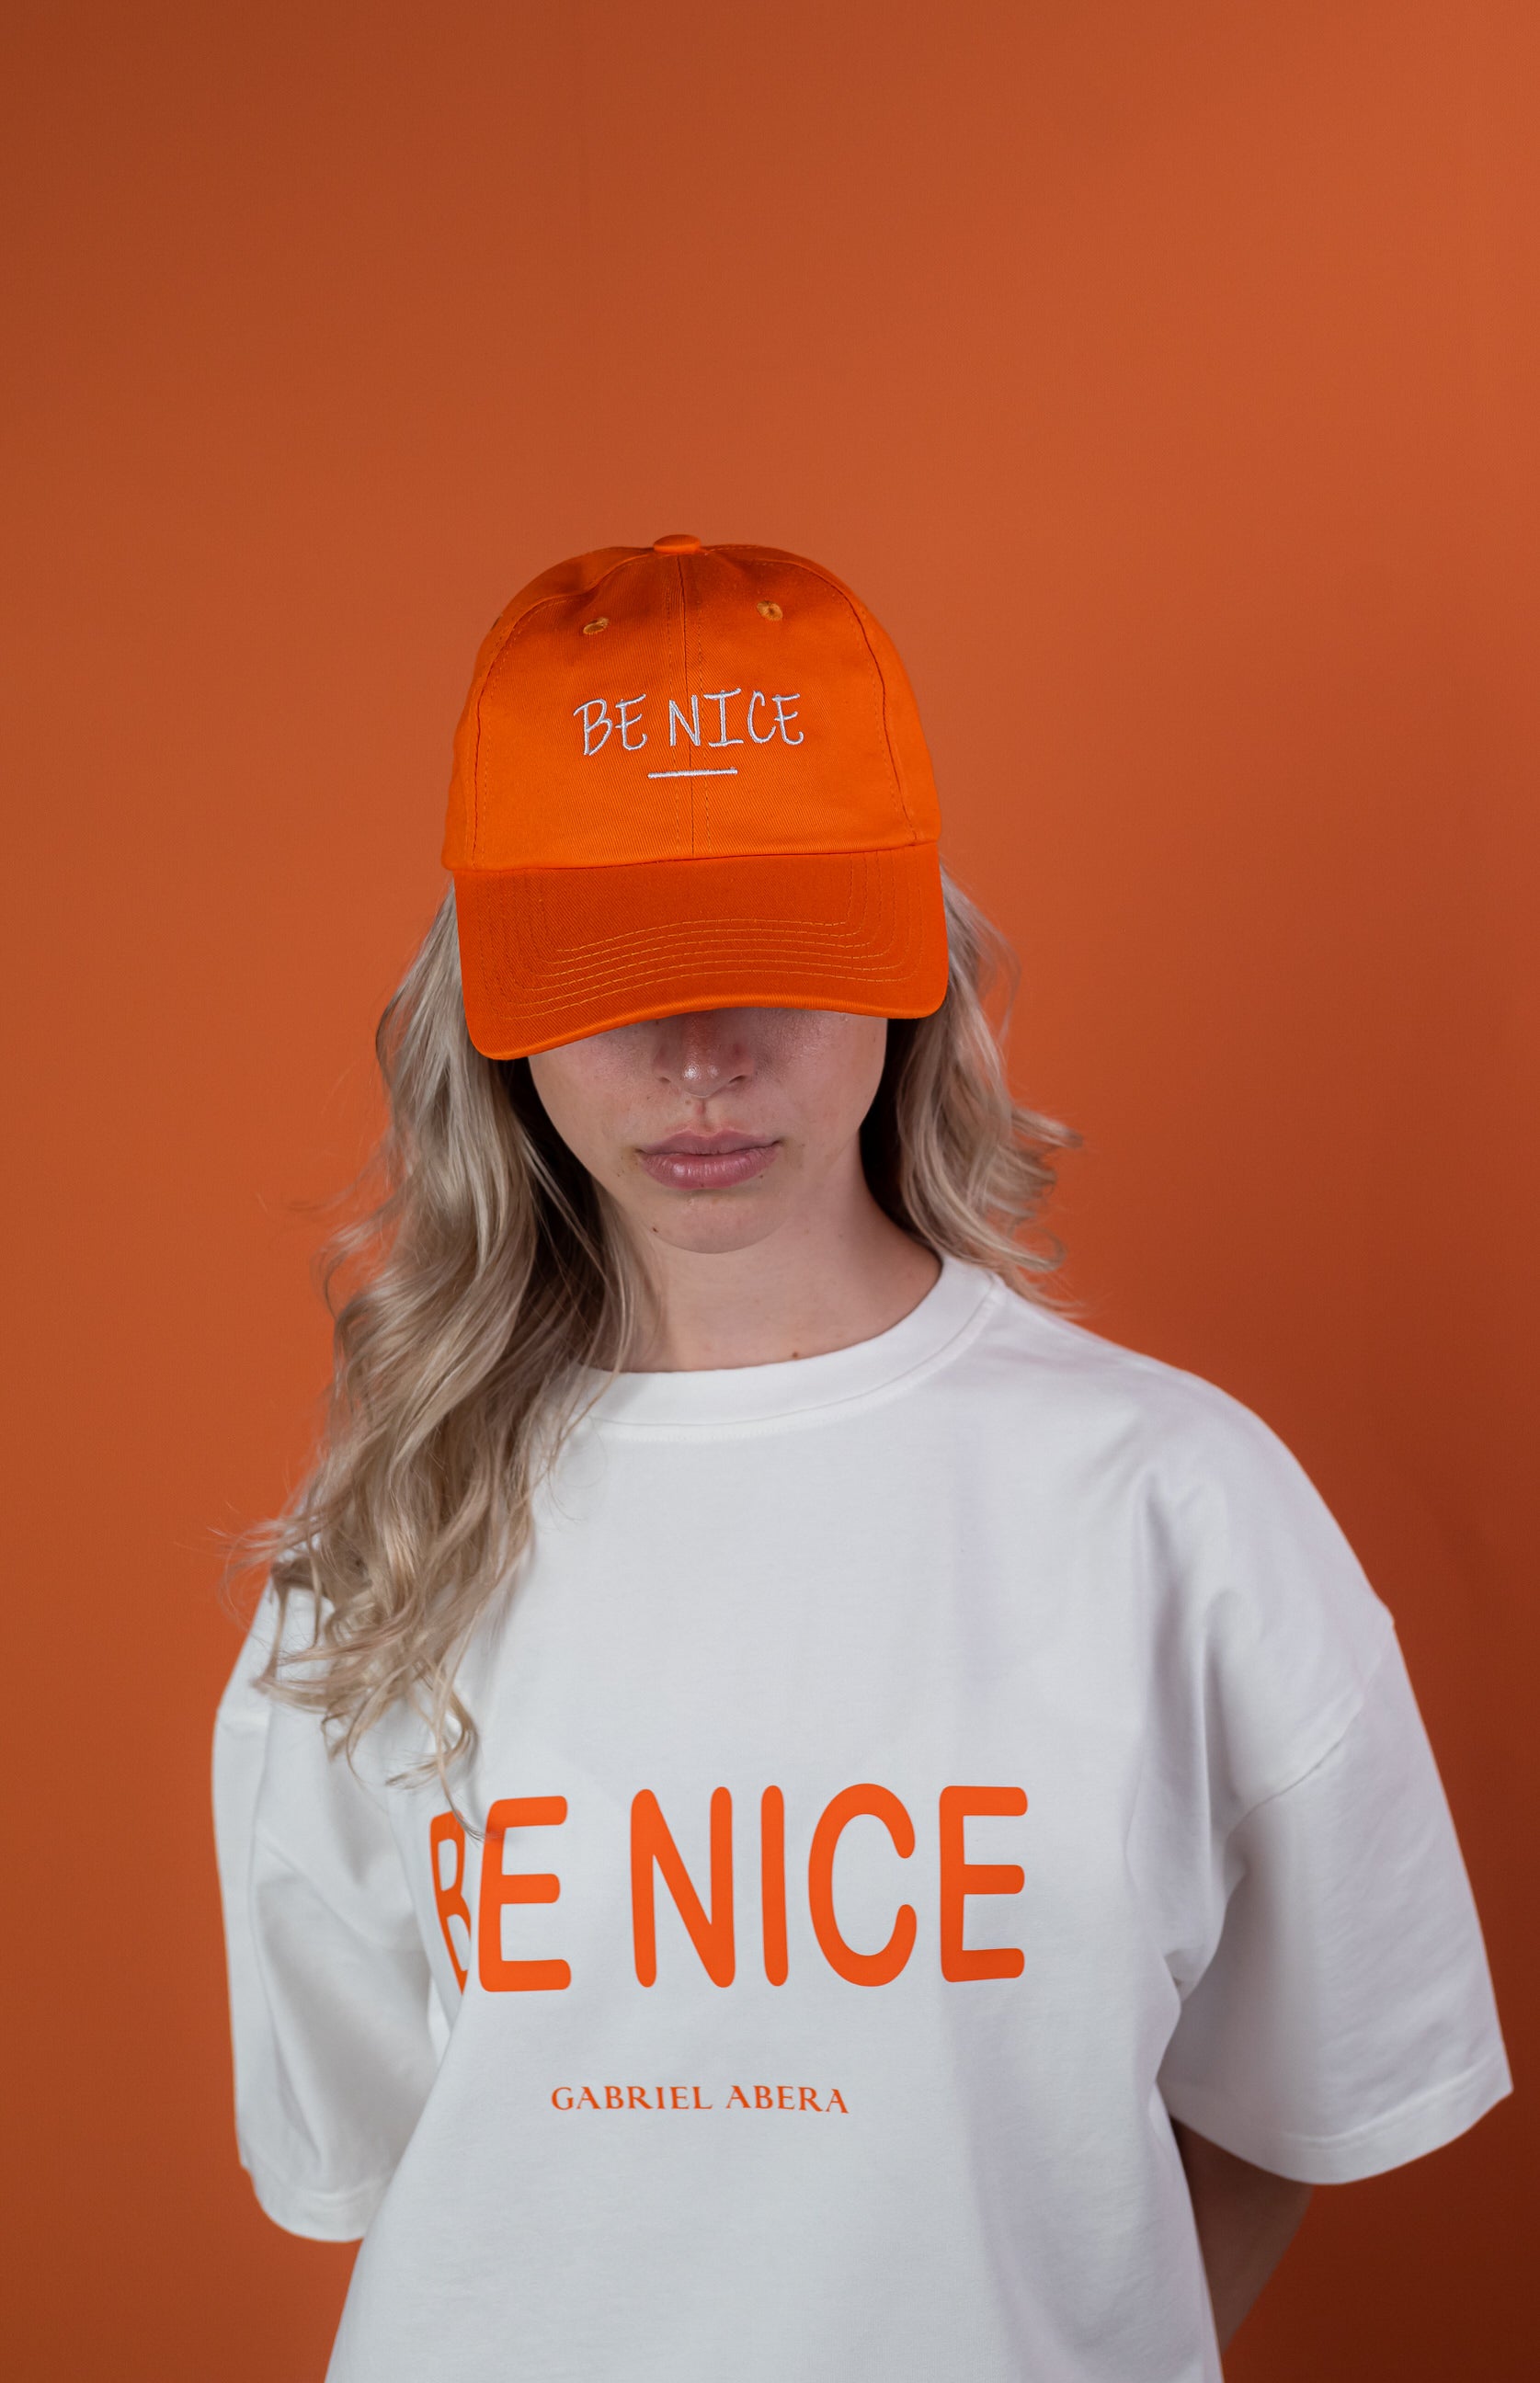 Female Model wearing a Orange cap with "be nice" writing on the front